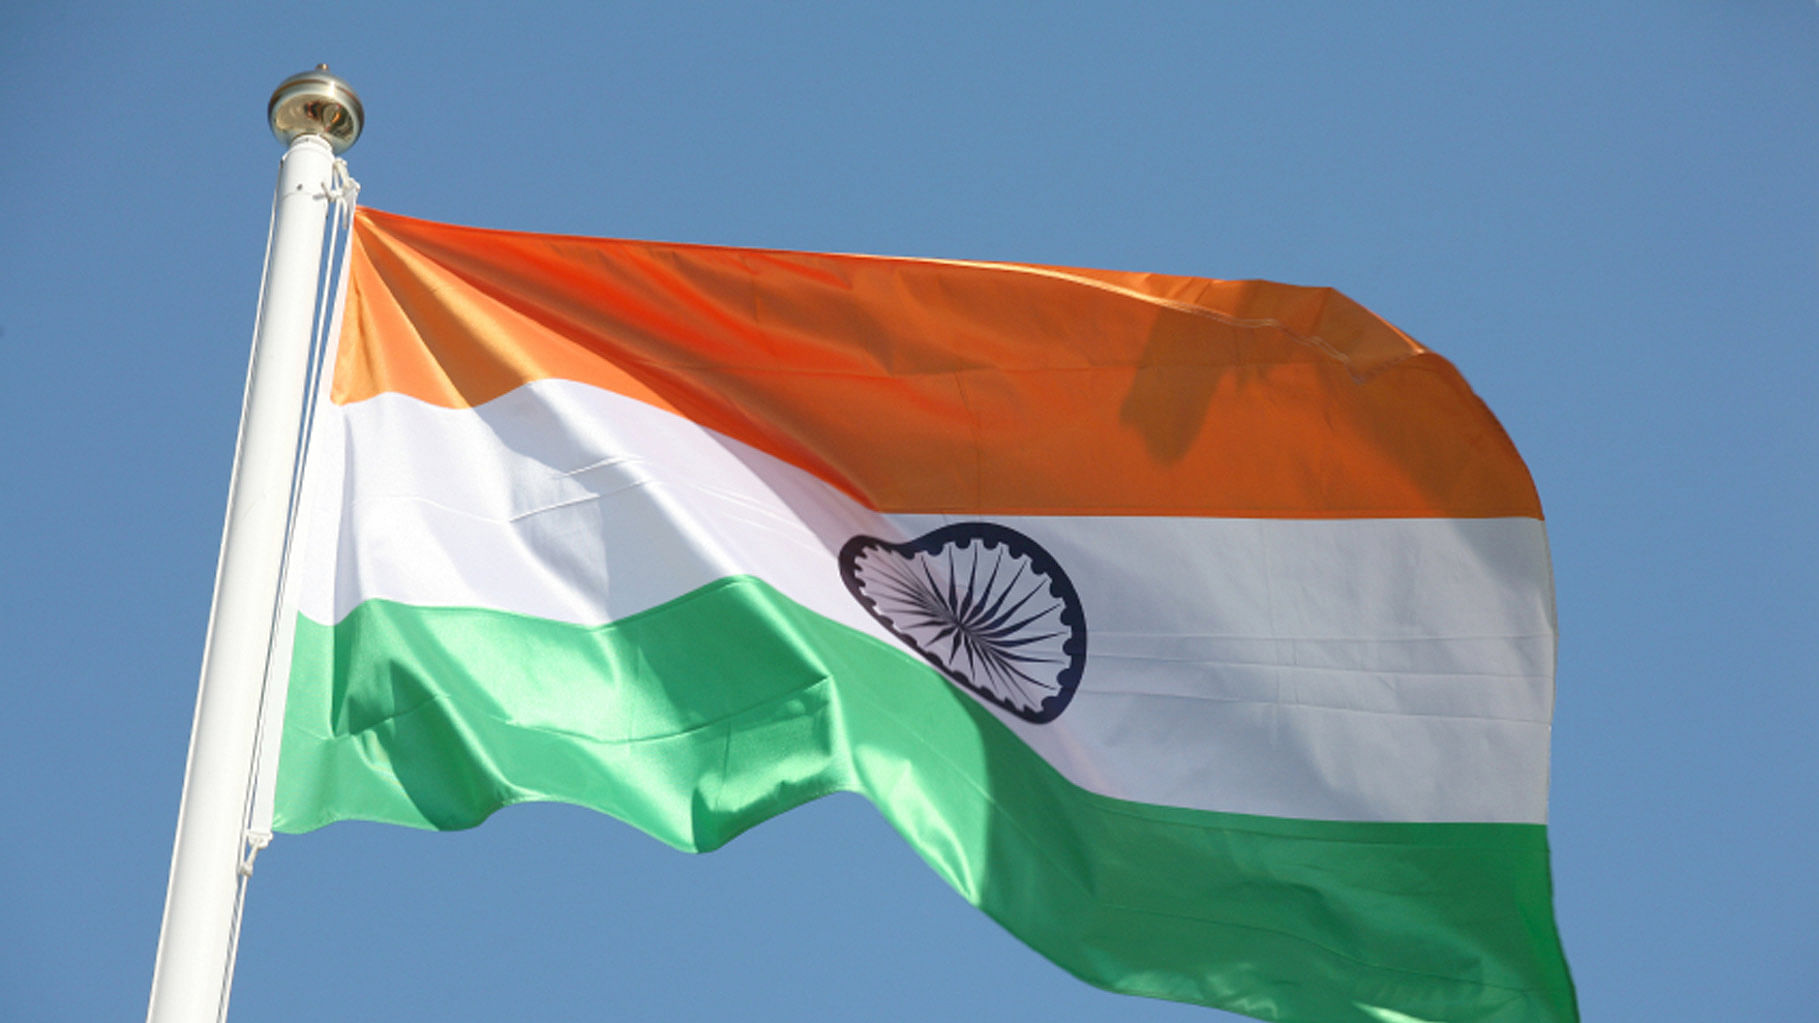 

In a meeting between VCs of Central Universities and MHRD, the ministry announced its decision to hoist the national flag in all universtiy campuses. (Photo: iStockPhoto)